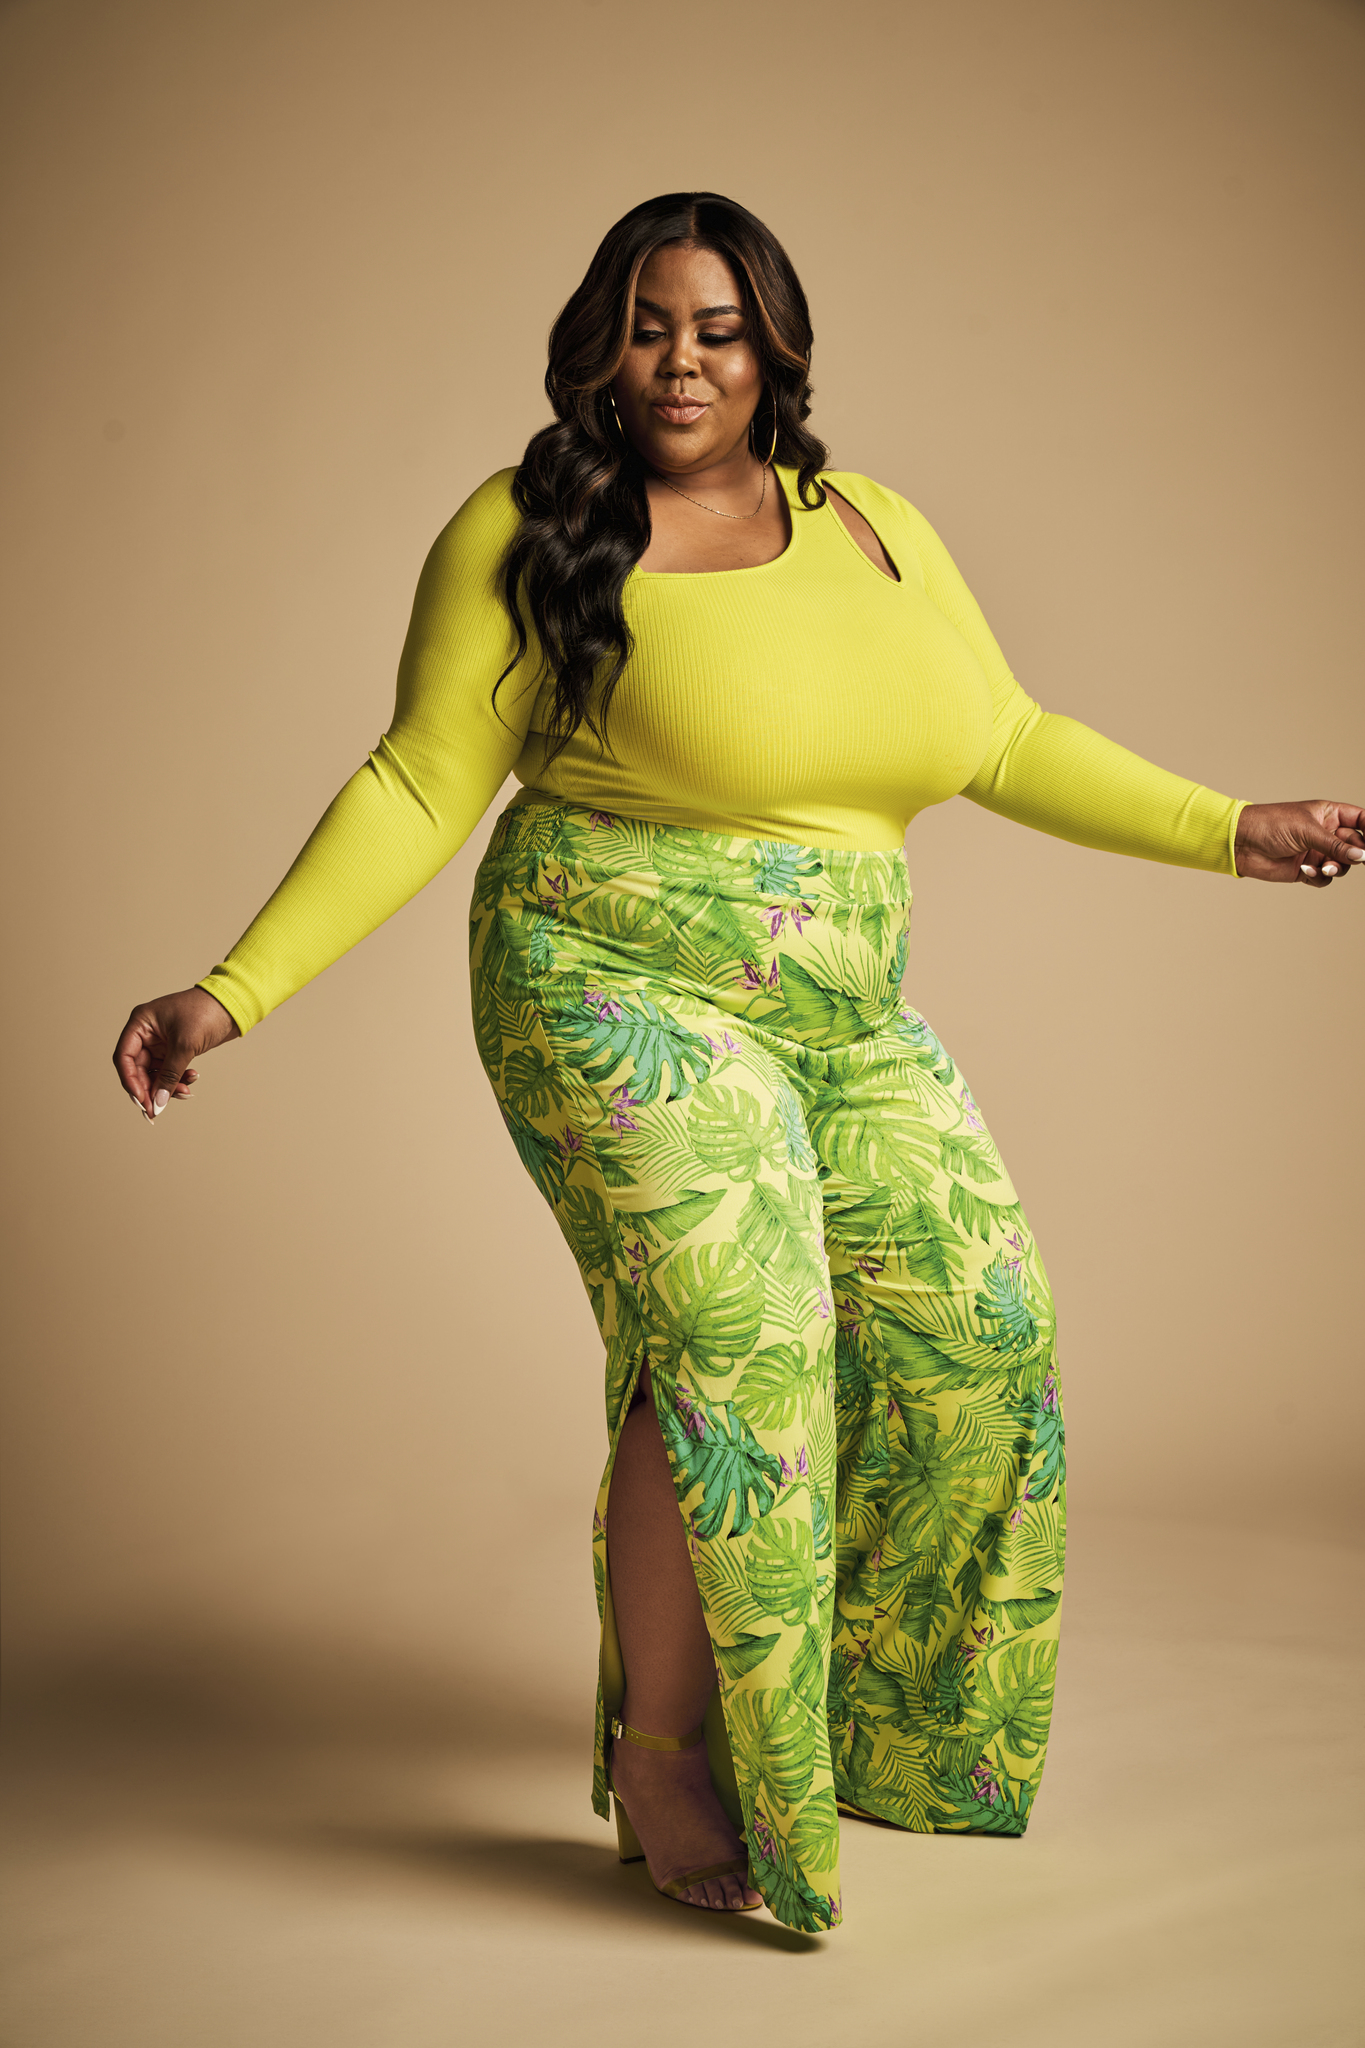 Nina Parker Macy's Plus Size Clothing Collection Makes History